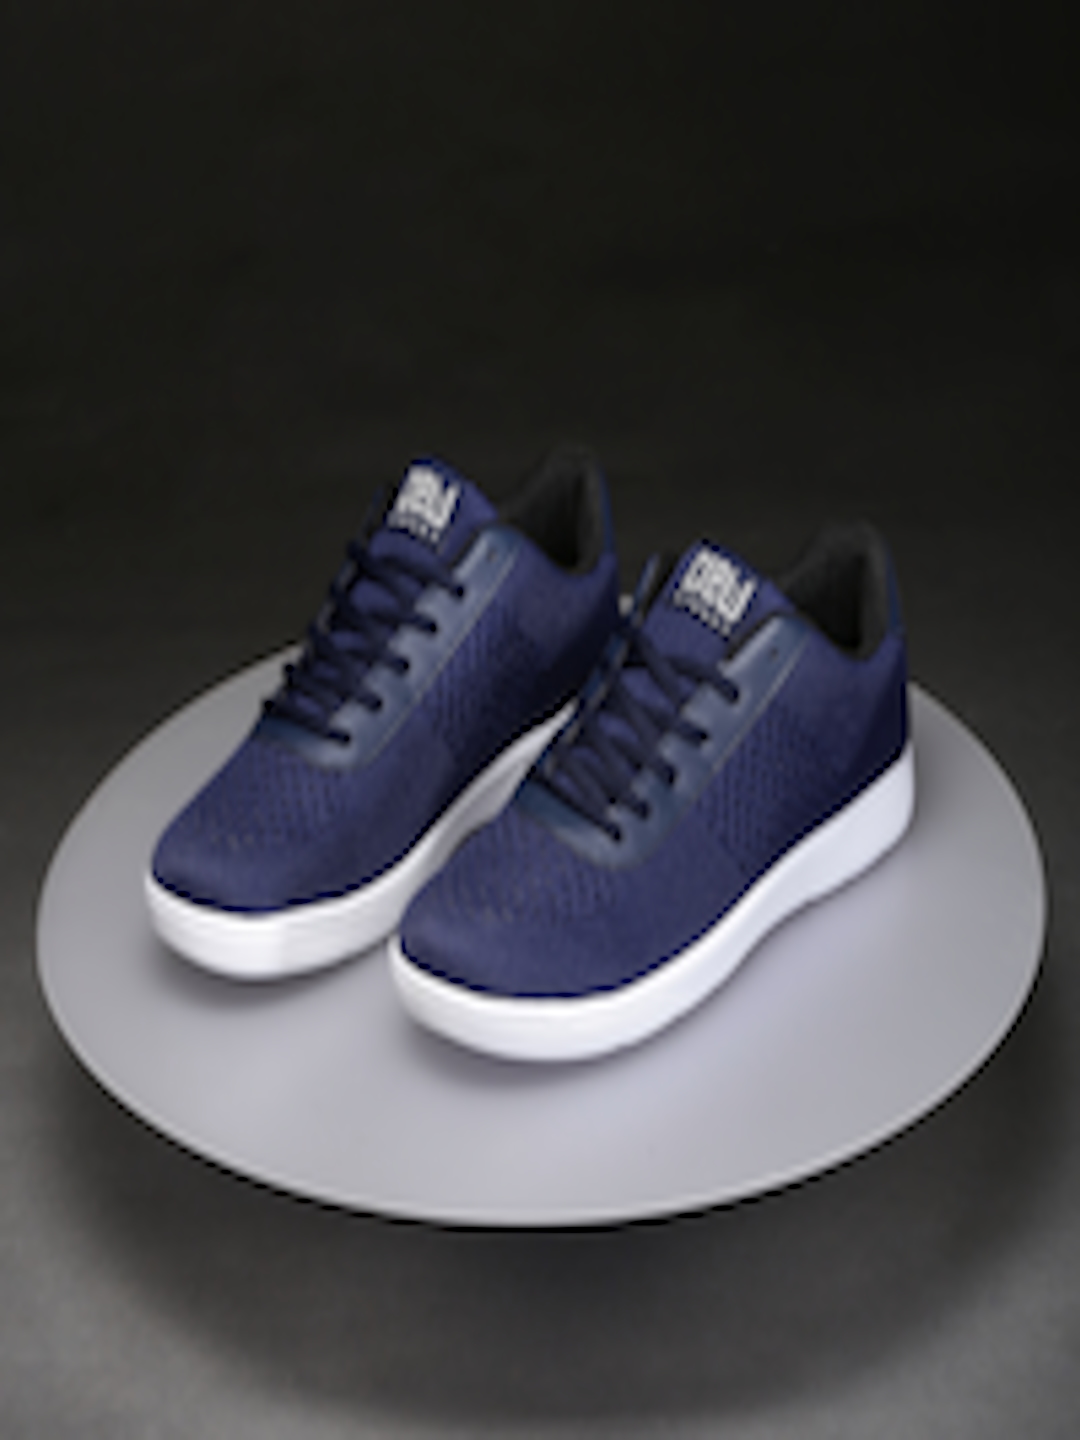 Buy Crew STREET Men Navy Blue Sneakers - Casual Shoes for ...